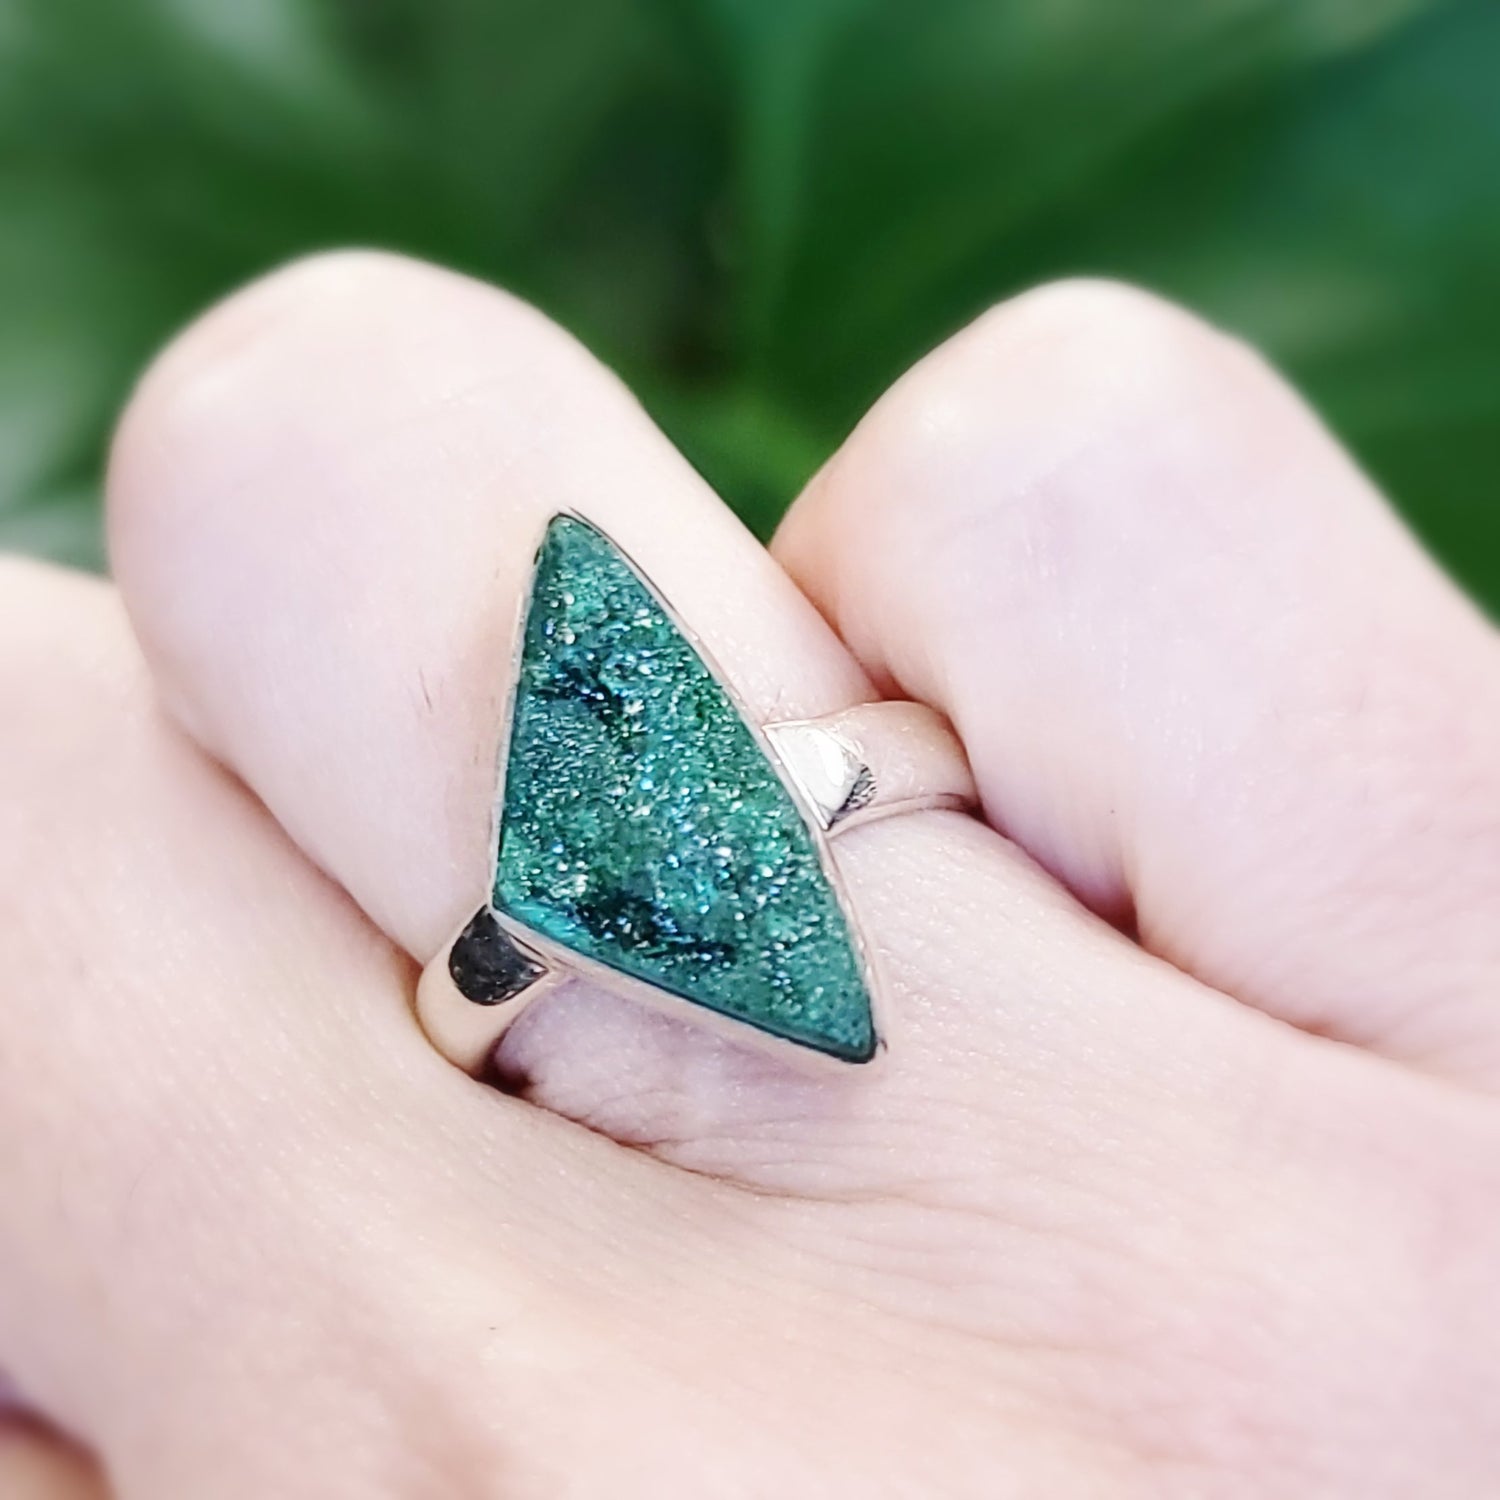 Malachite Ring Sterling Silver Druzy Rough Stone Trillion Cut - Elevated Metaphysical